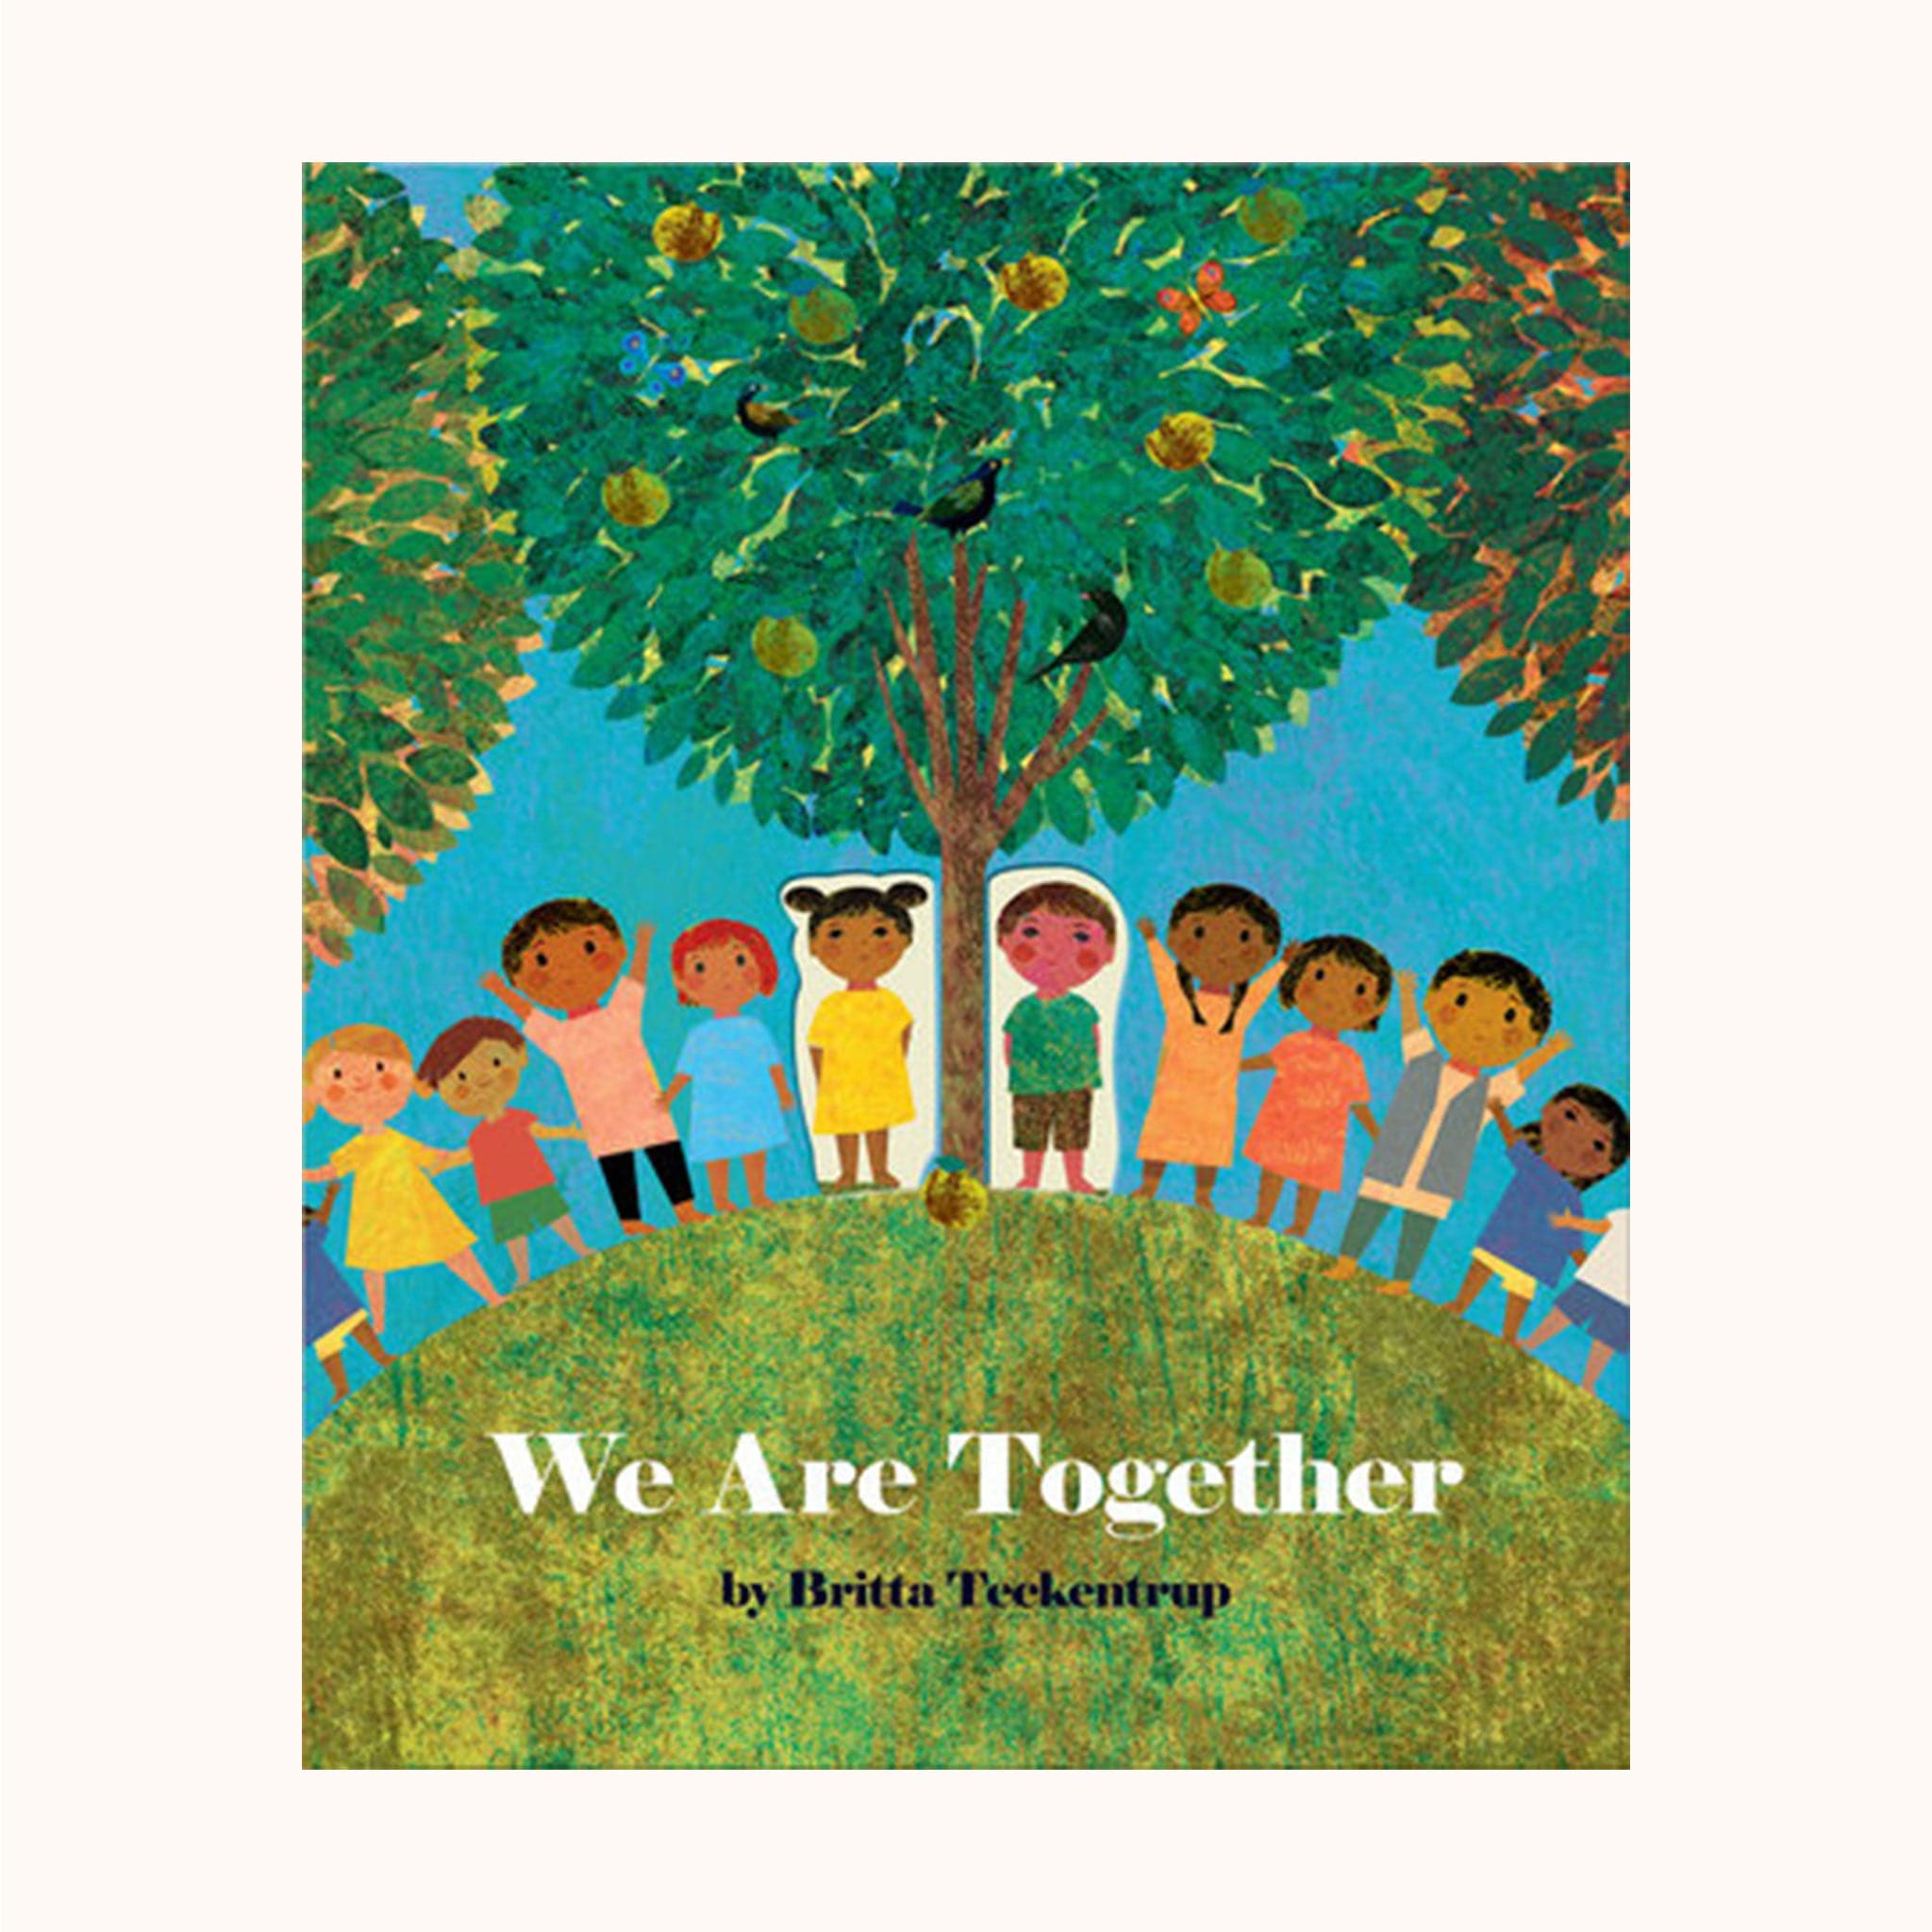 This children's picture book cover features a row of lively children standing side by side below three towering trees. The tree in the middle is in focus and the other two peak into the frame. The title reads 'We Are Together' in white text over the textured green, round hill the children stand on. 